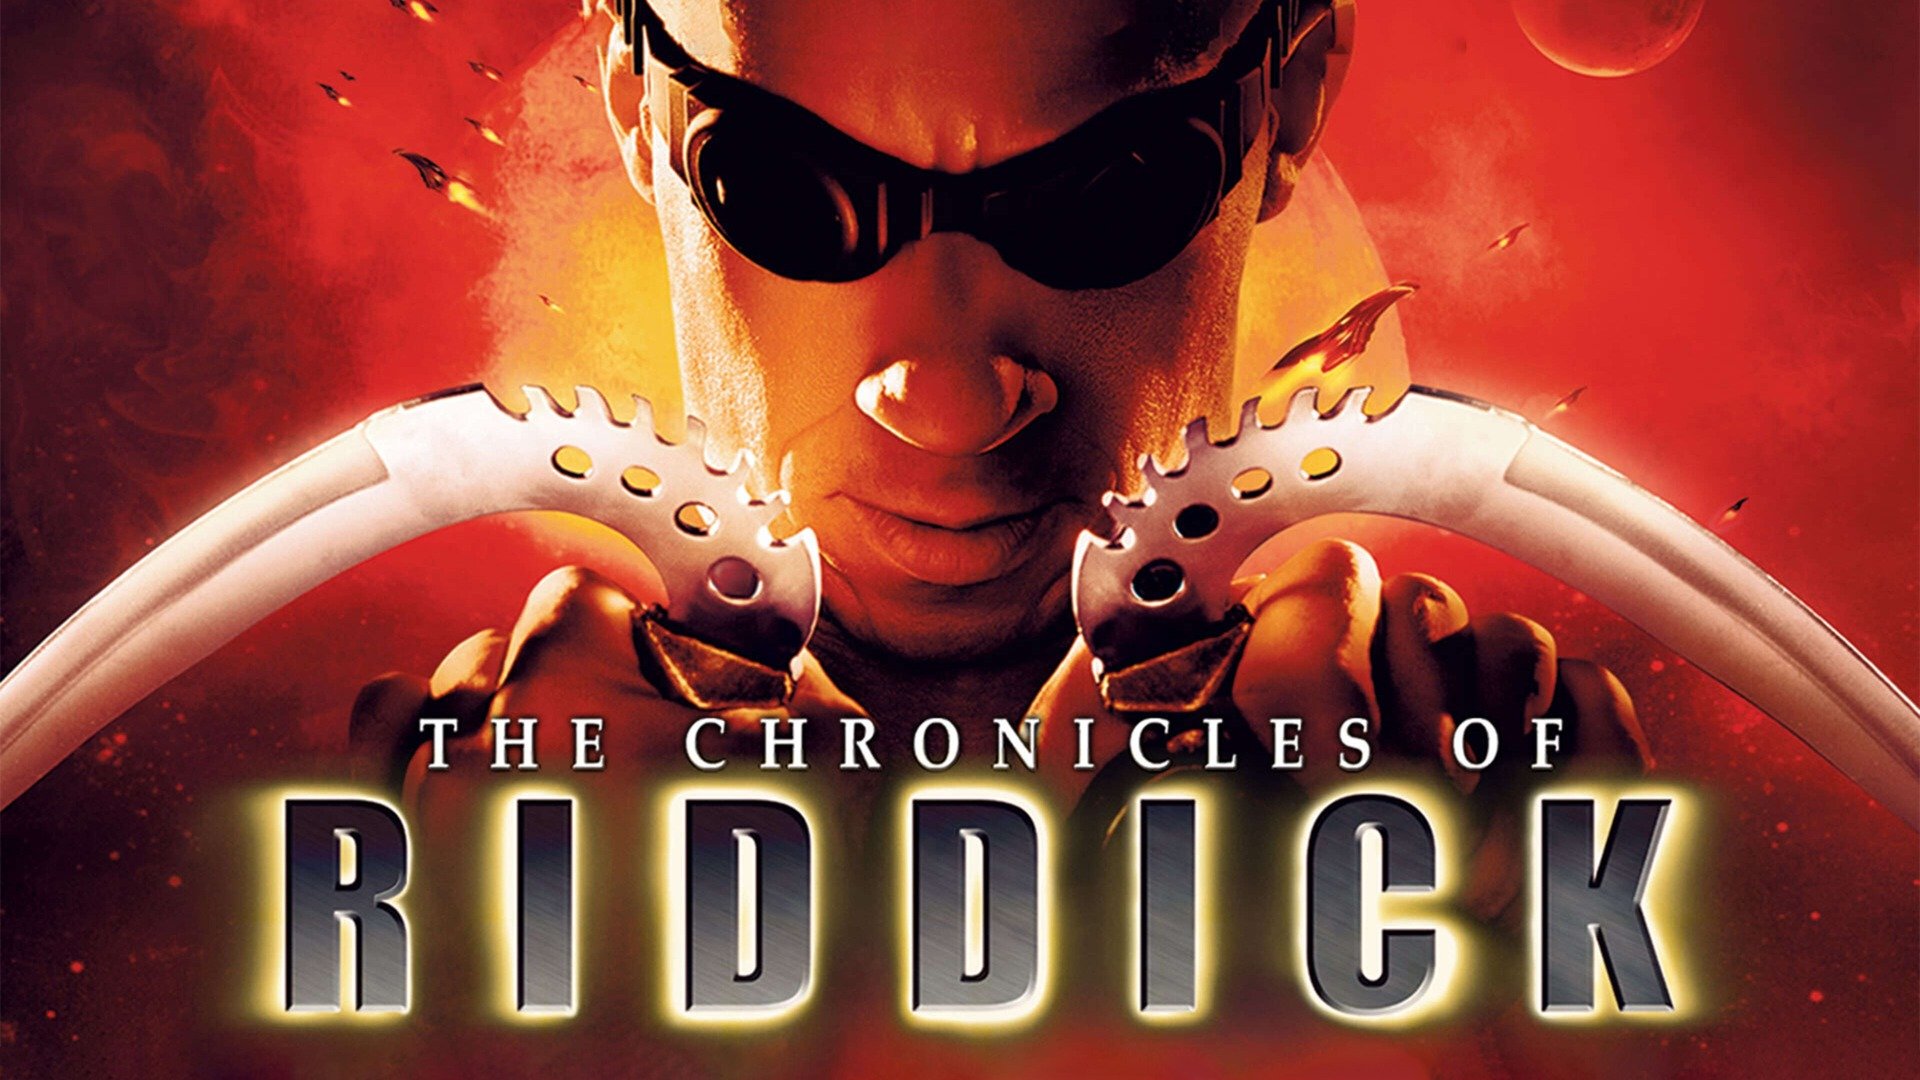 The Chronicles of Riddick - Movie - Where To Watch